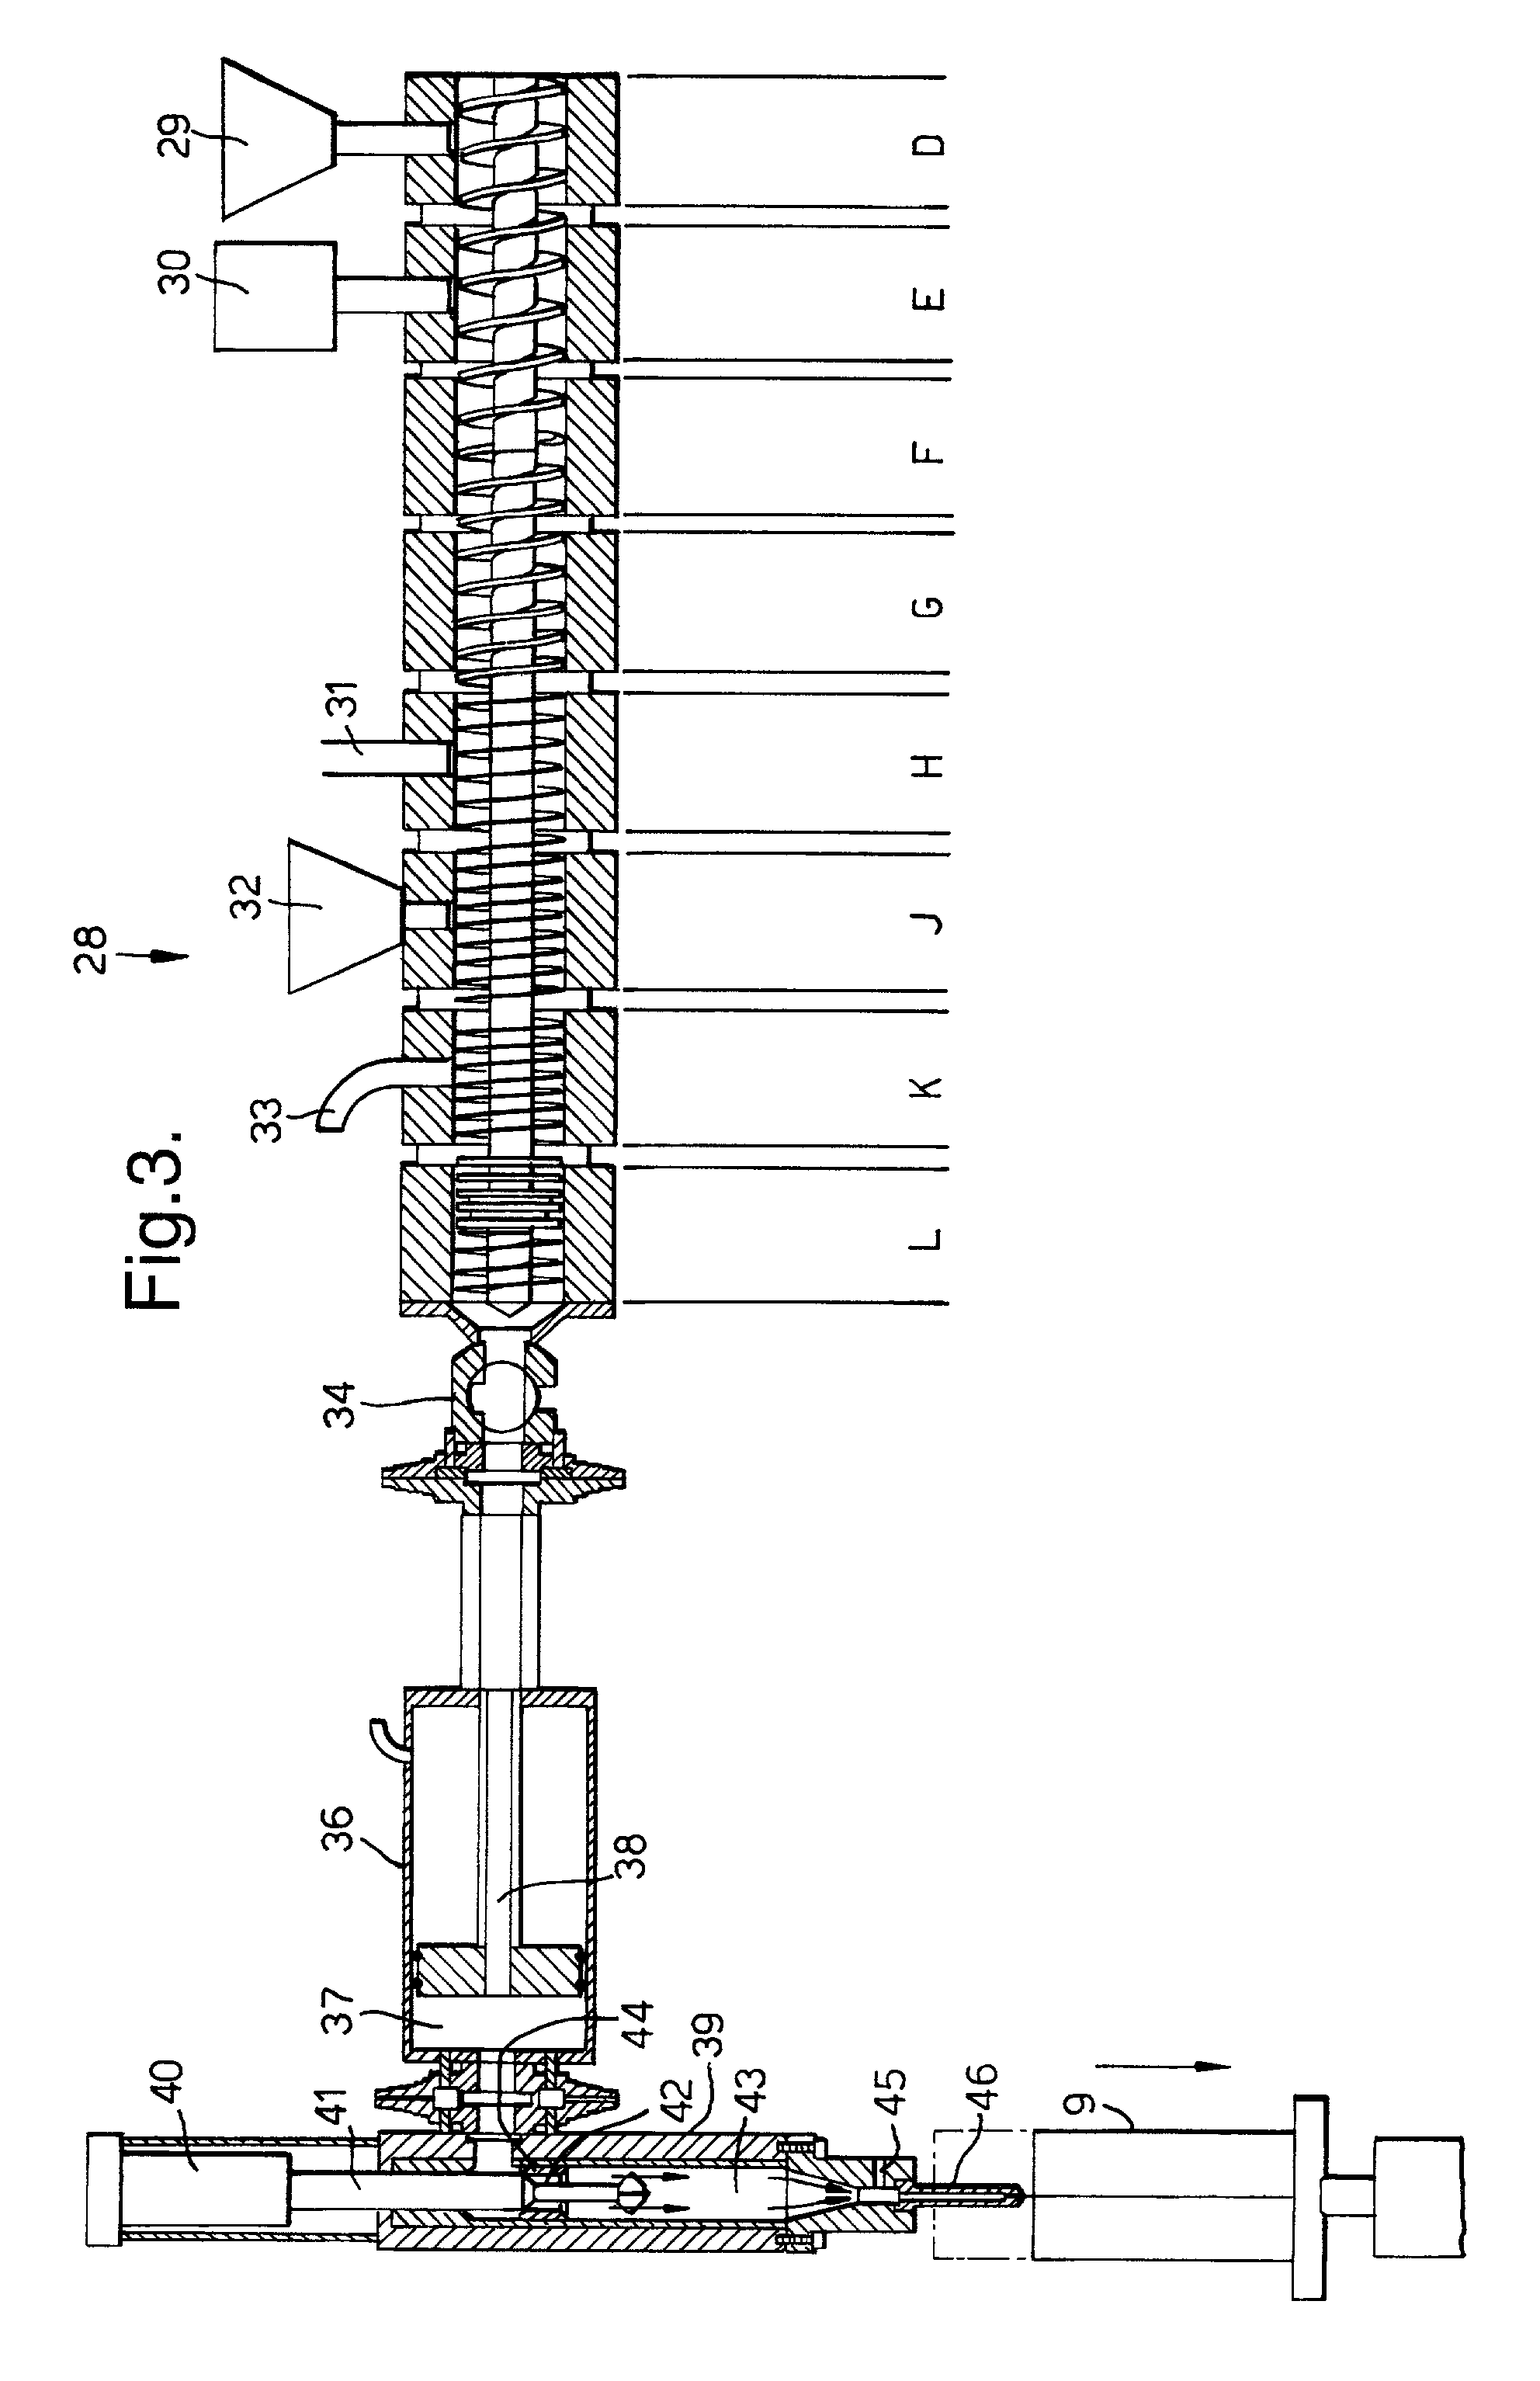 Process and apparatus for the production of a detergent composition